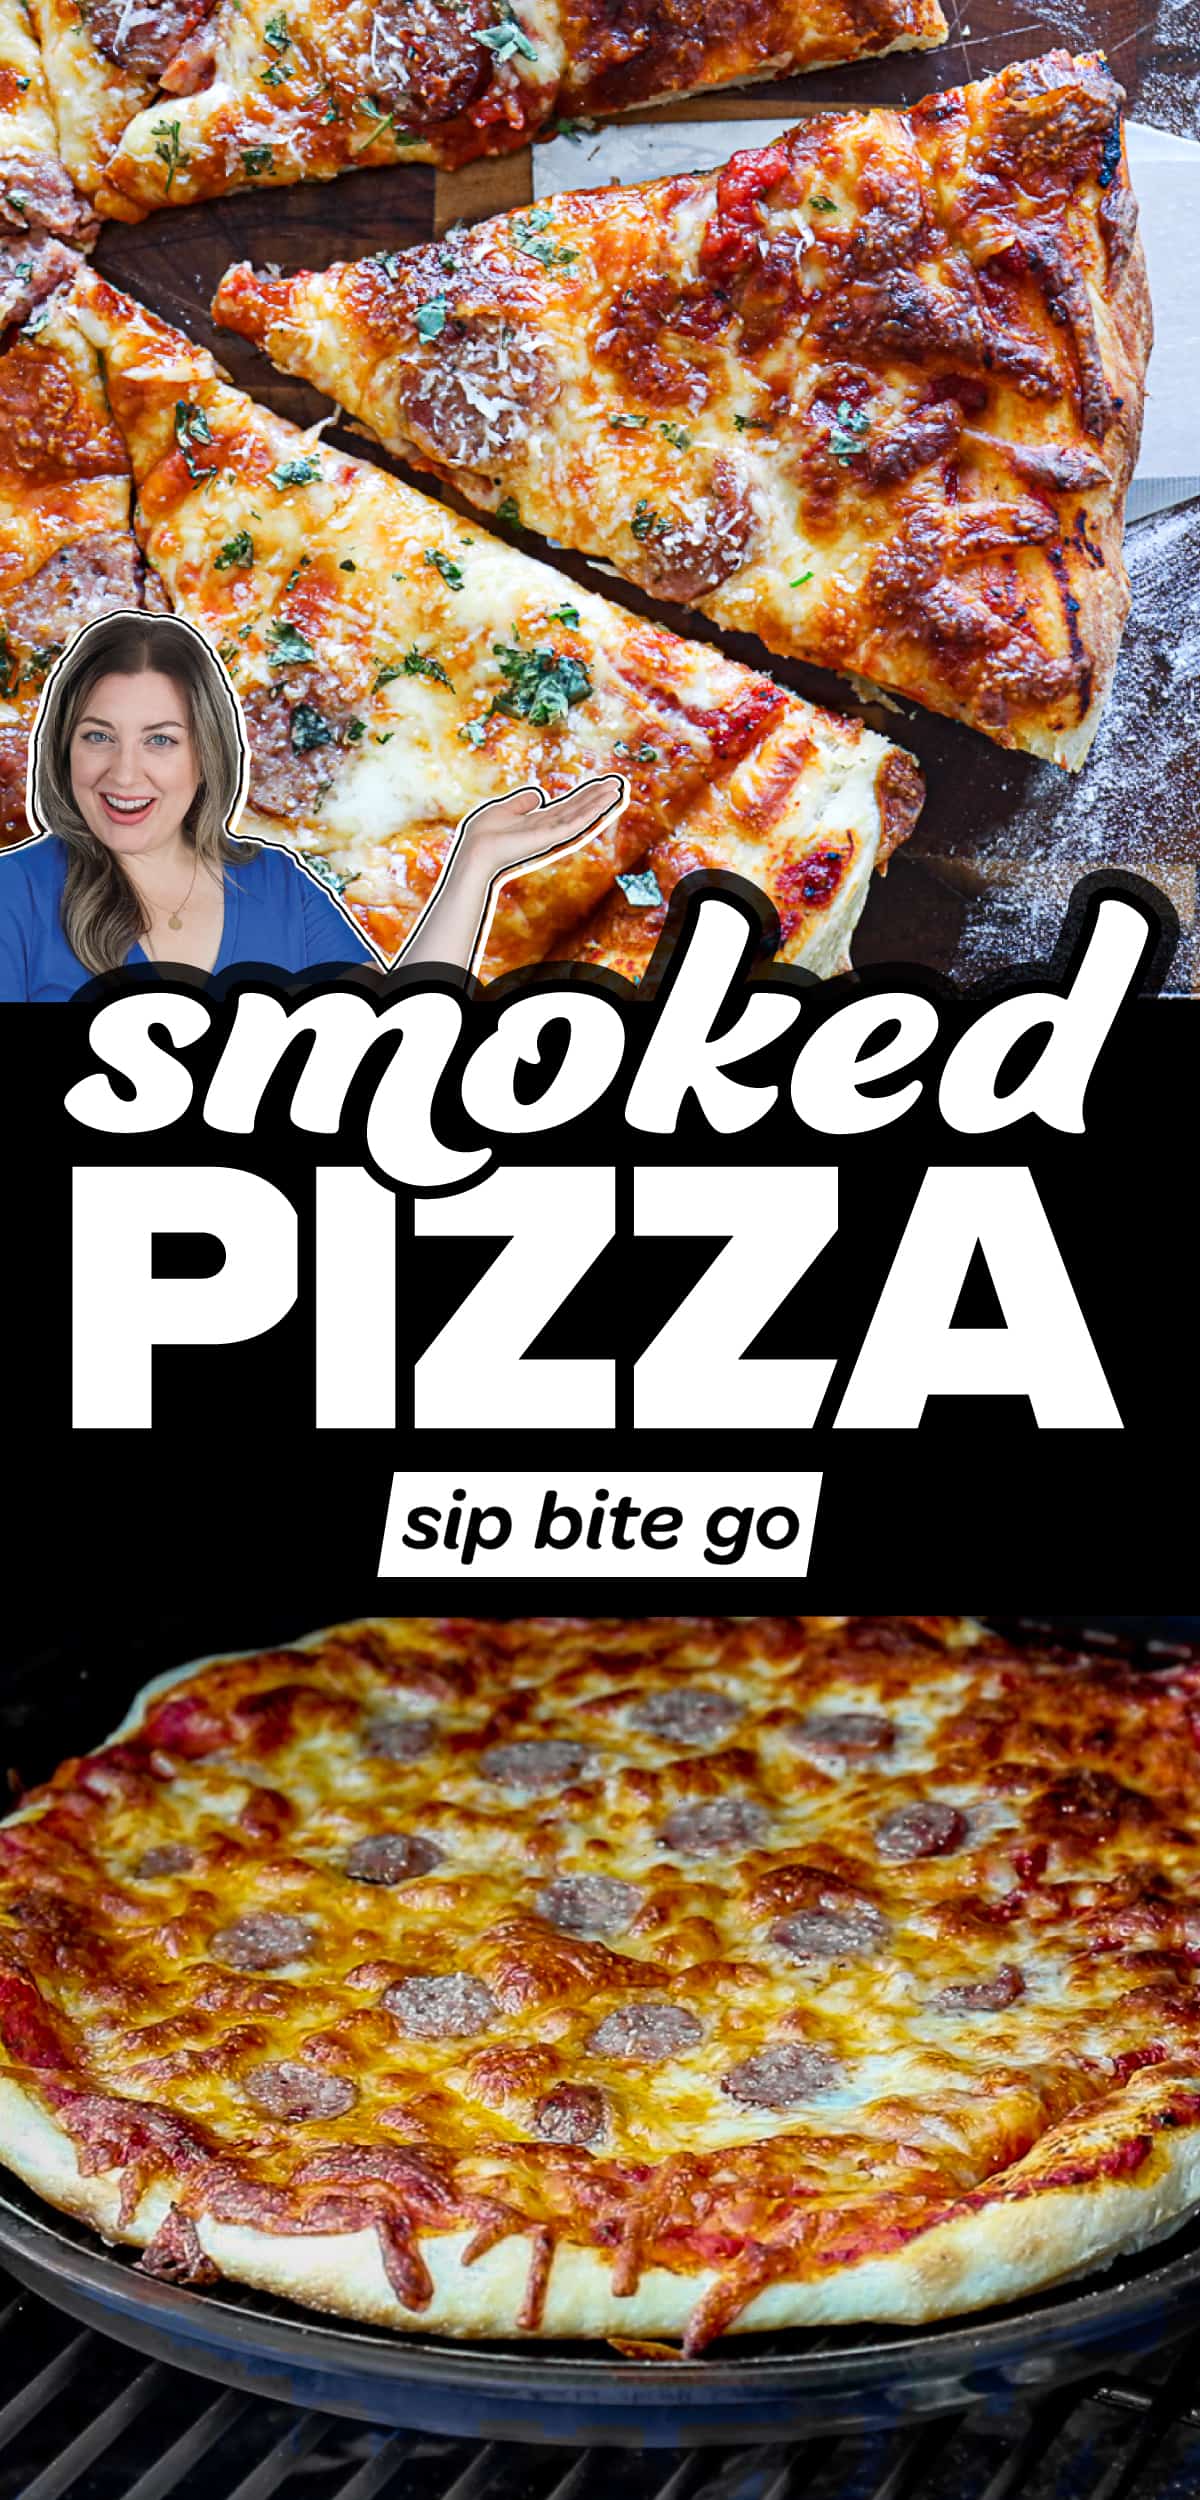 Smoked Traeger Pizza Recipe images with text overlay